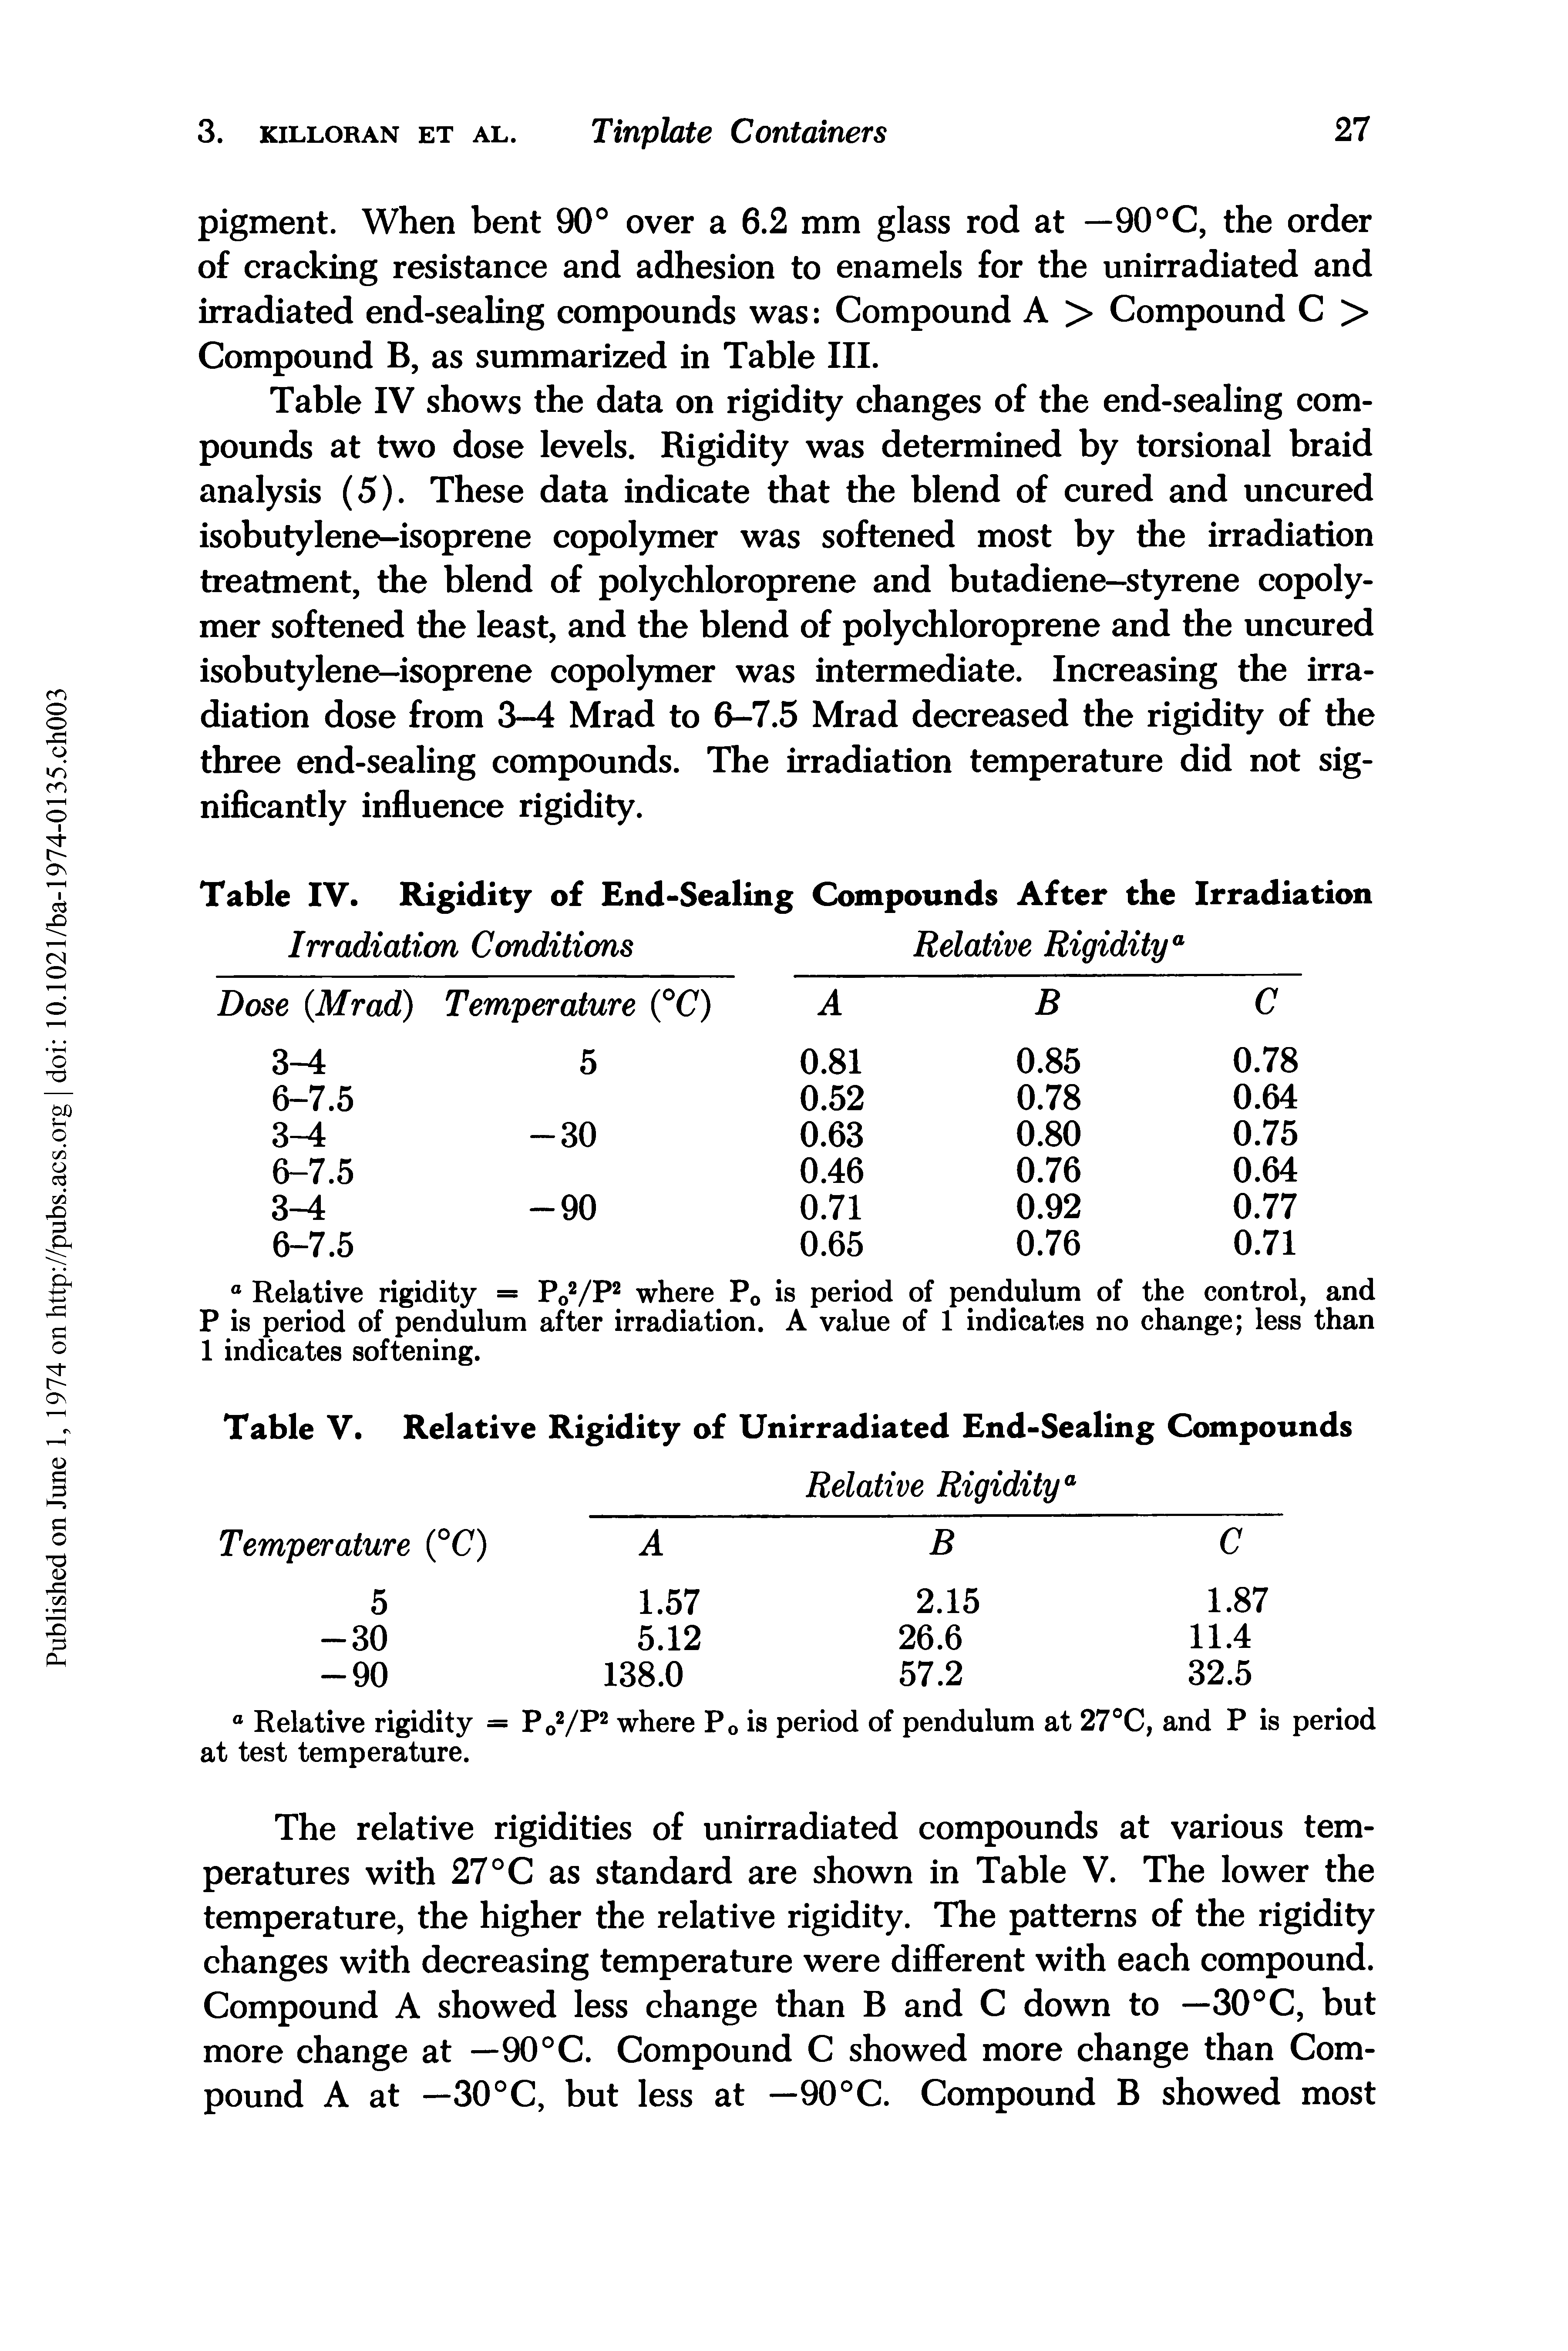 Table IV shows the data on rigidity changes of the end-sealing compounds at two dose levels. Rigidity was determined by torsional braid analysis (5). These data indicate that the blend of cured and uncured isobutylene-isoprene copolymer was softened most by the irradiation treatment, the blend of polychloroprene and butadiene-styrene copolymer softened the least, and the blend of polychloroprene and the uncured isobutylene-isoprene copolymer was intermediate. Increasing the irradiation dose from 3-4 Mrad to 6-7.5 Mrad decreased the rigidity of the three end-sealing compounds. The irradiation temperature did not significantly influence rigidity.